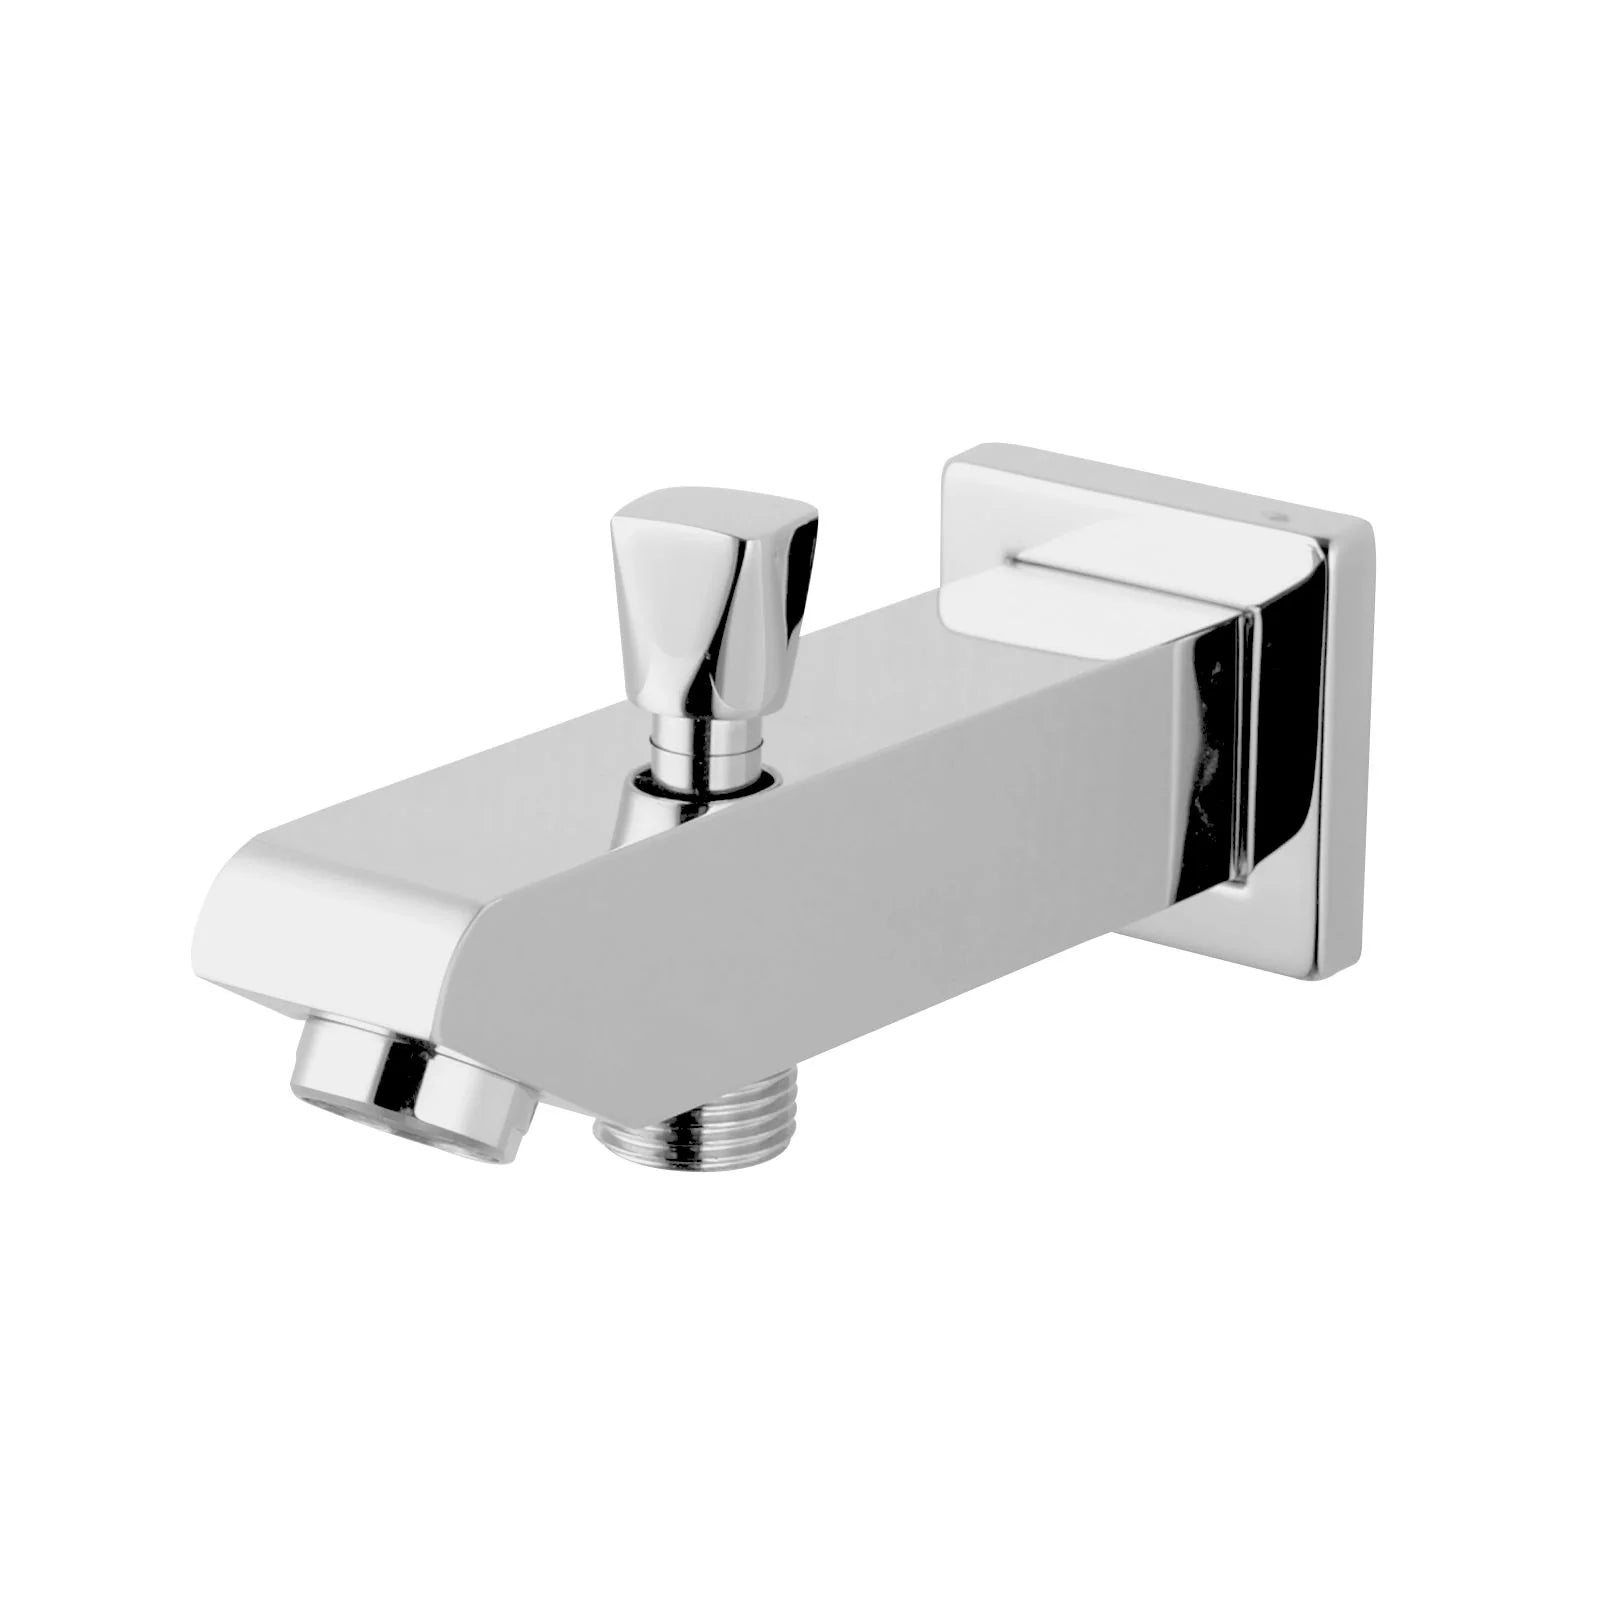 Blaze Wall Spout with Diverter: Stylish Addition for Bathtub or Basin-Chrome-CH0011_BS